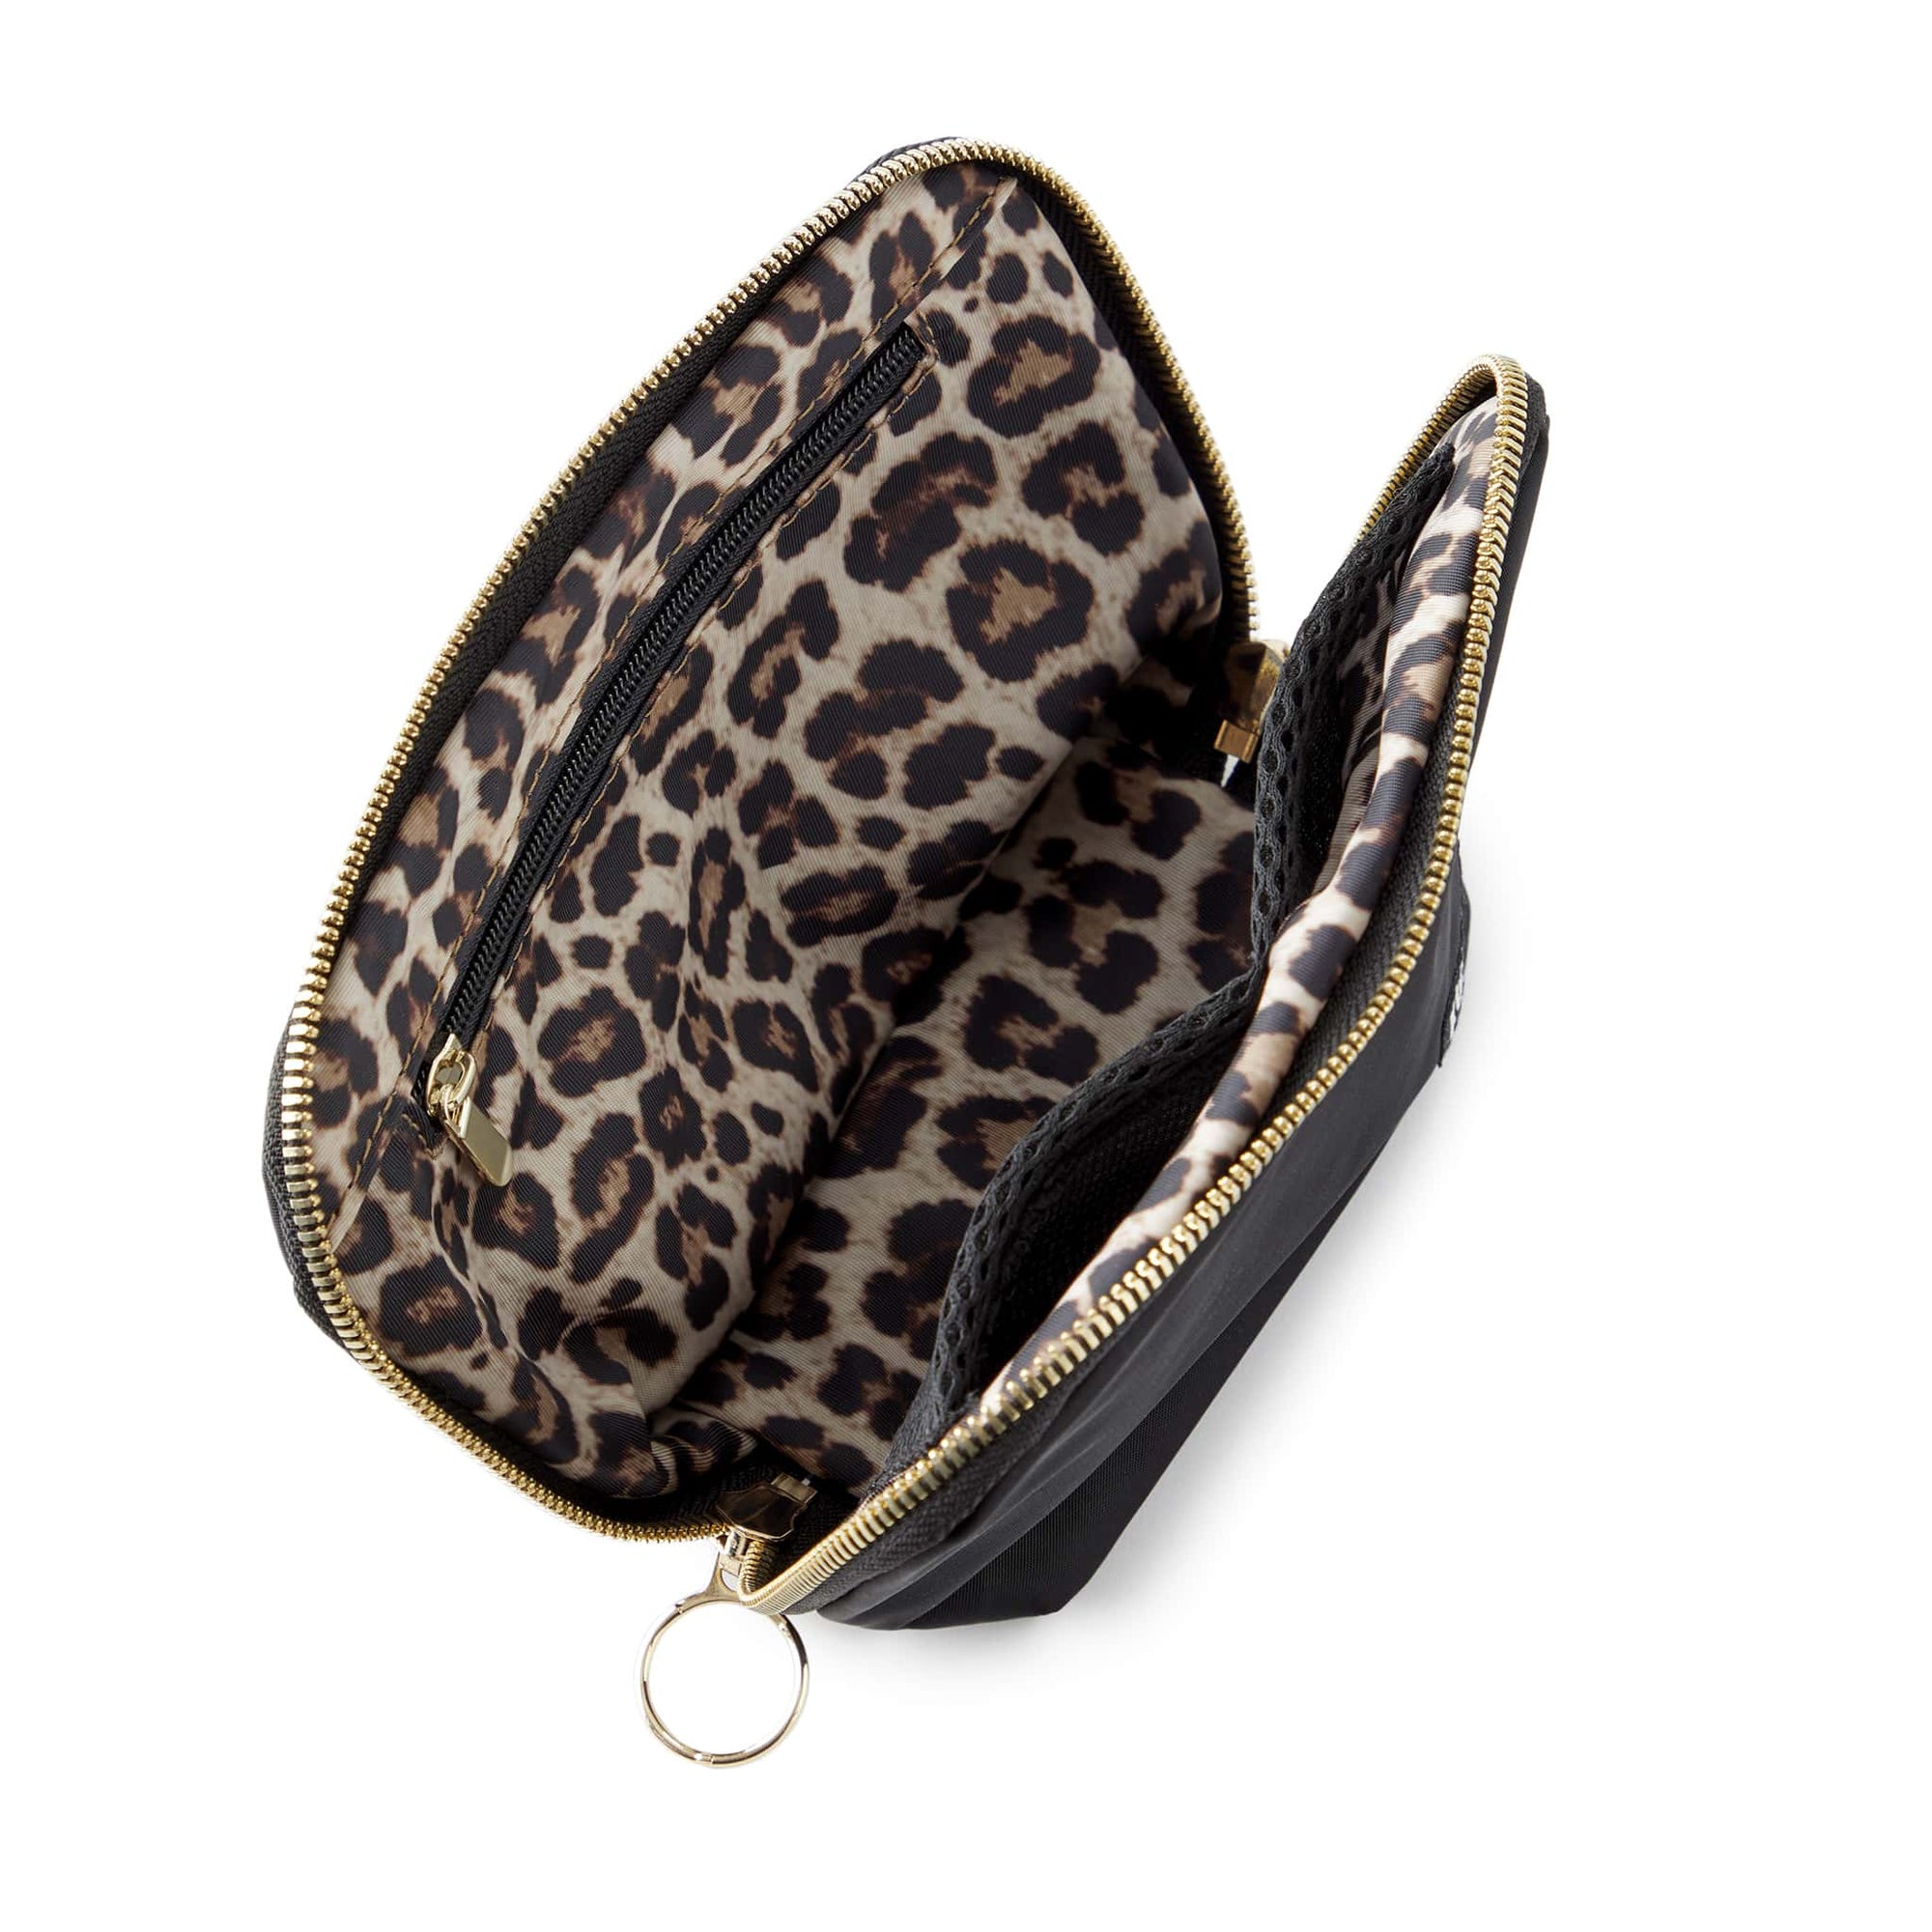 color: Satin Black Fabric with Leopard Interior; alt: Everyday Small Size Makeup Bag | KUSSHI